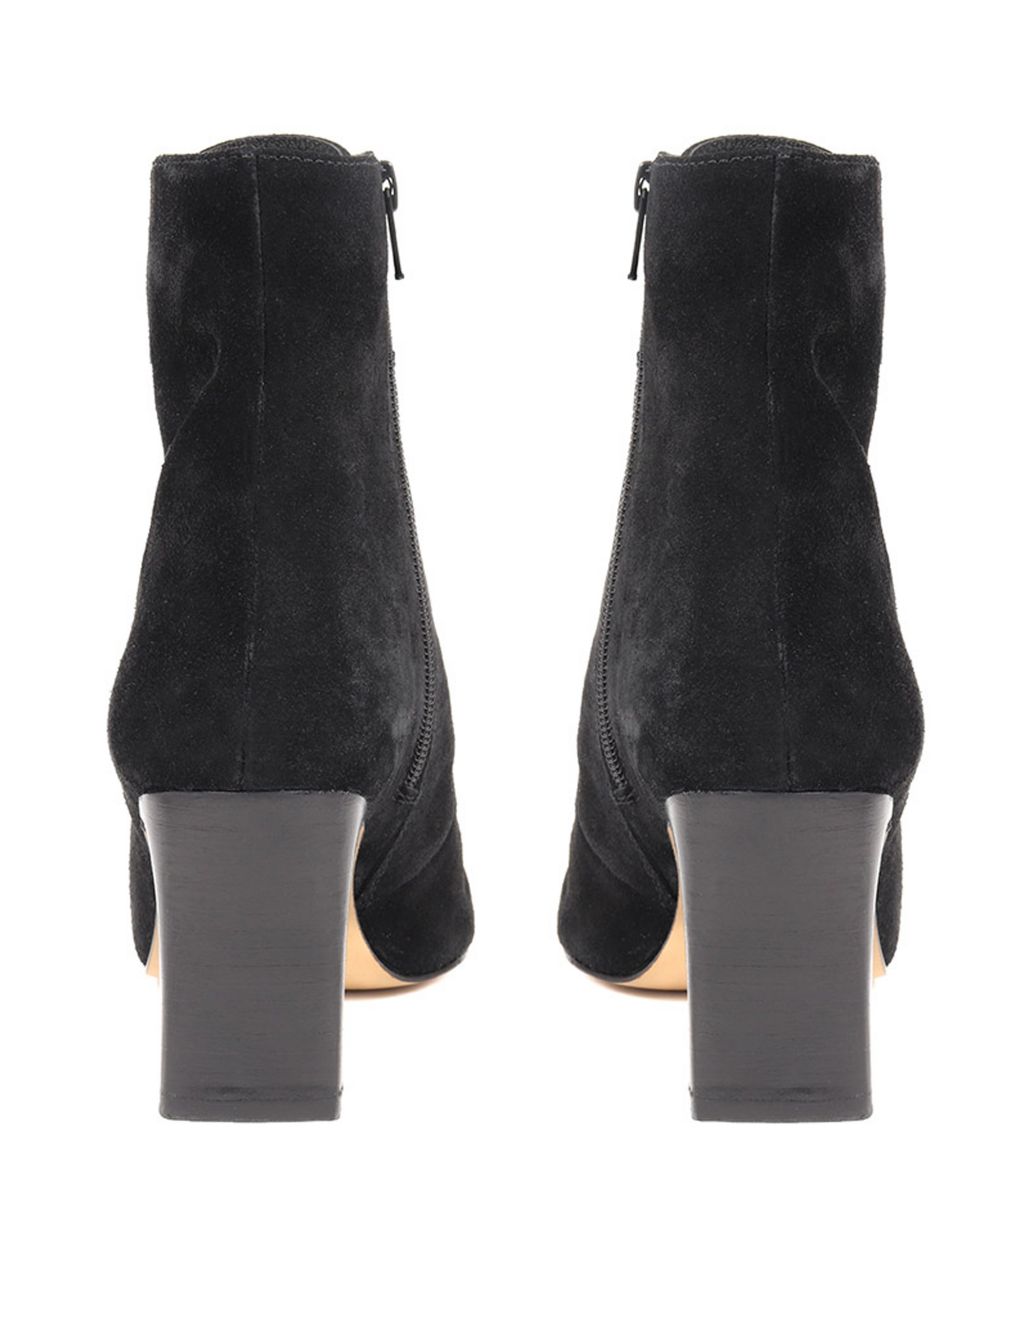 Suede Lace Up Block Heel Ankle Boots image 5